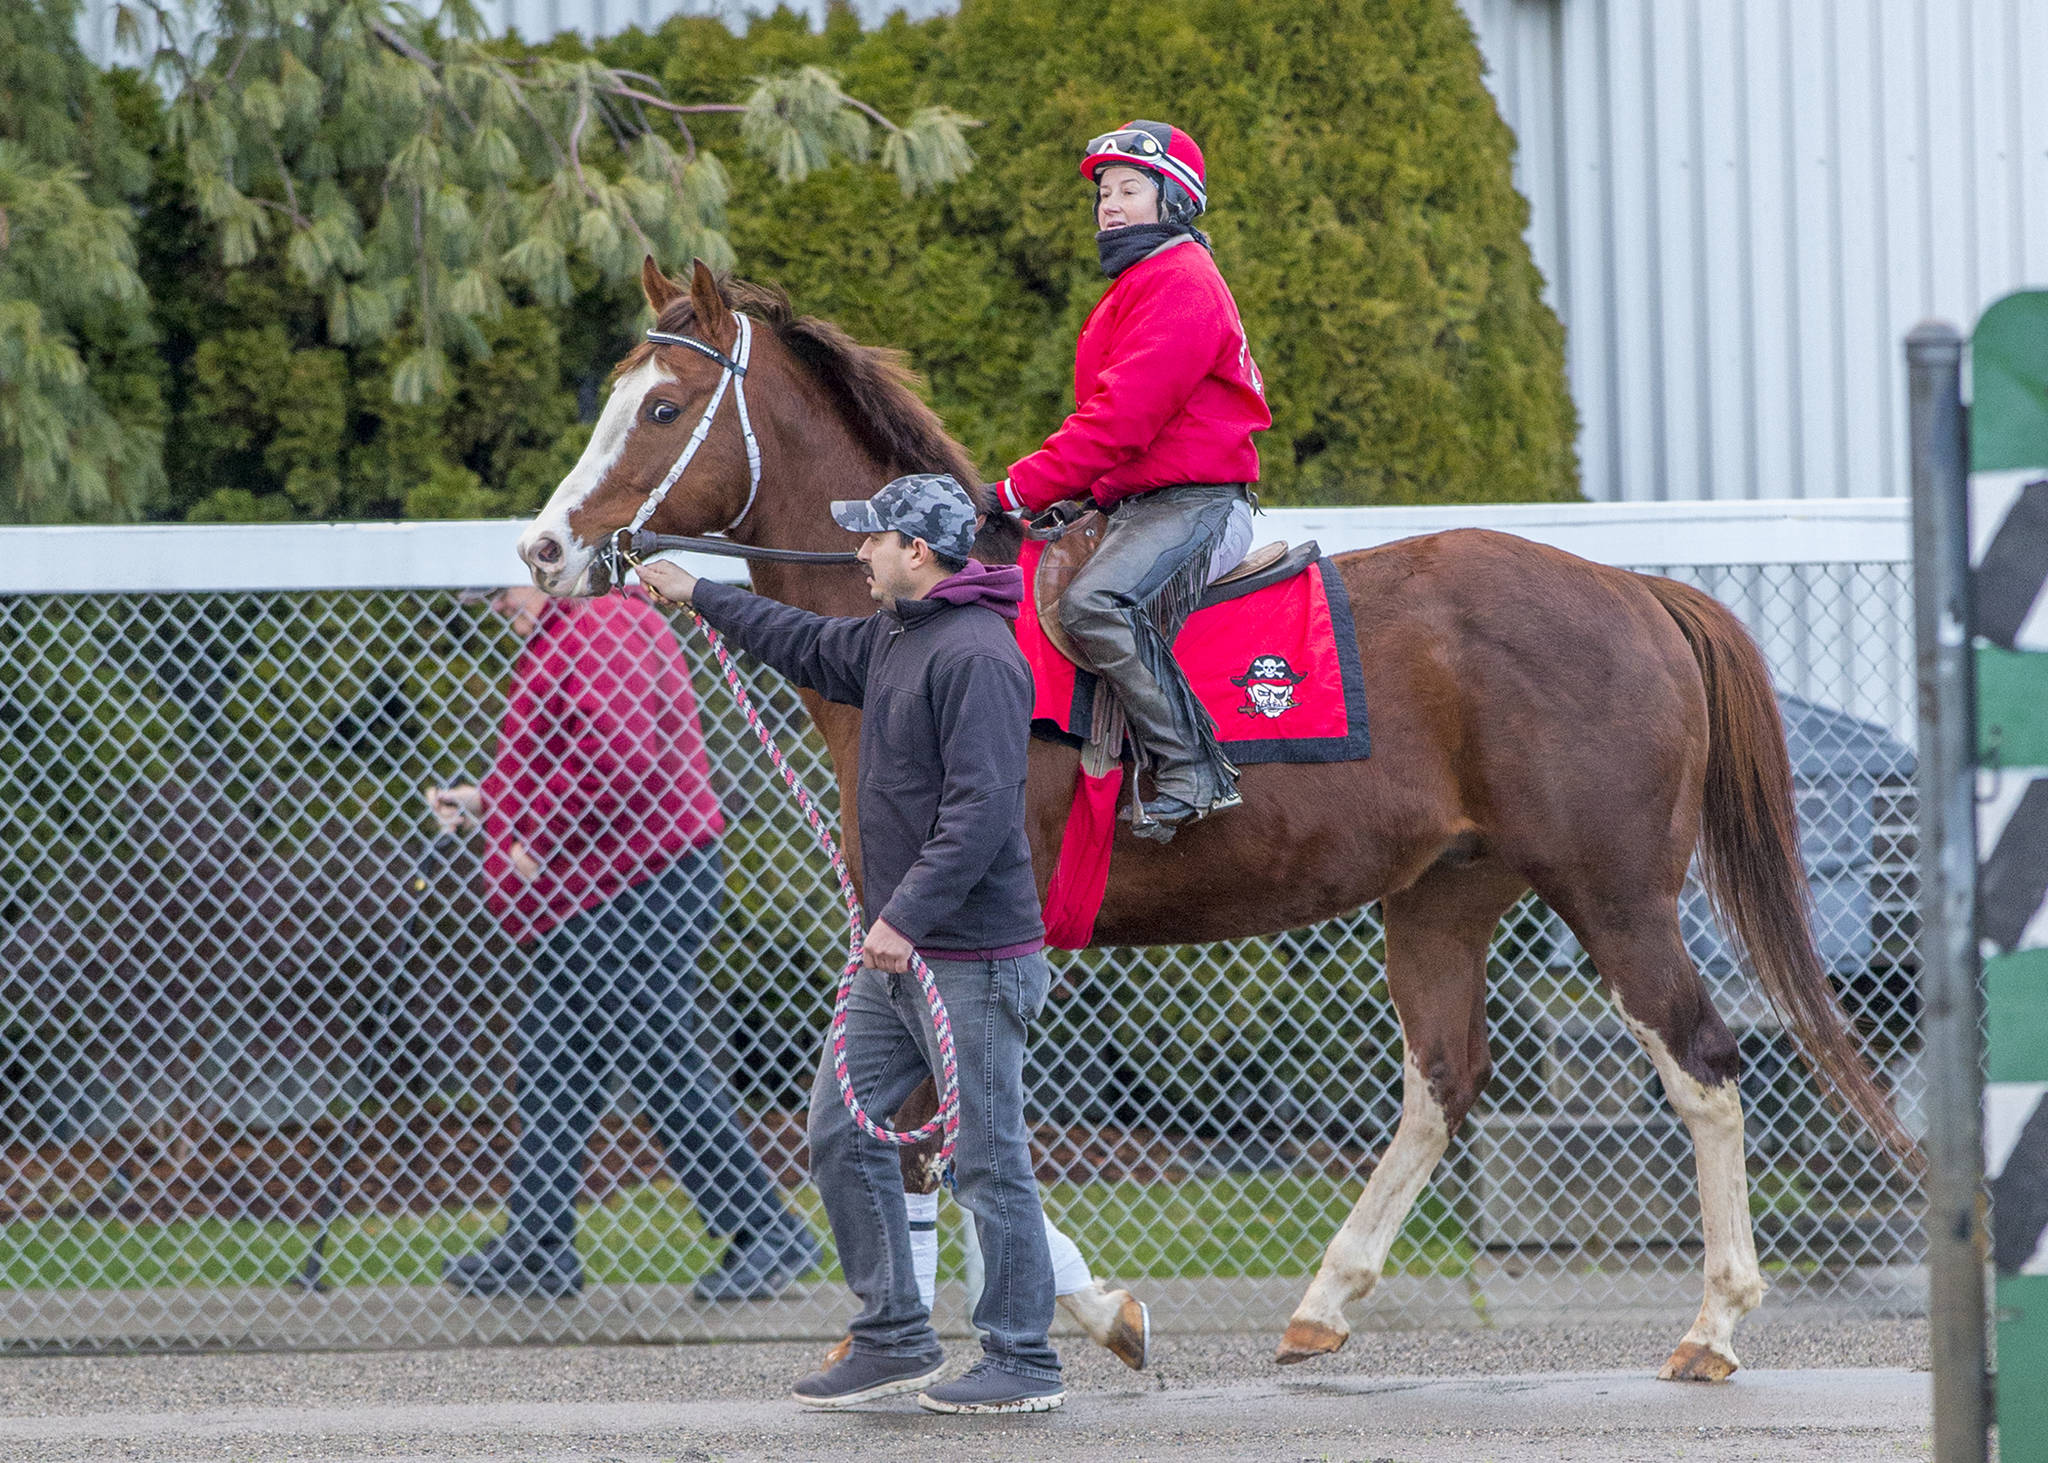 Barkley, the 2018 Longacres Mile champion, and Jennifer Whitaker were first on the track for winter training at Emerald Downs in February. COURTESY PHOTO, Emerald Downs